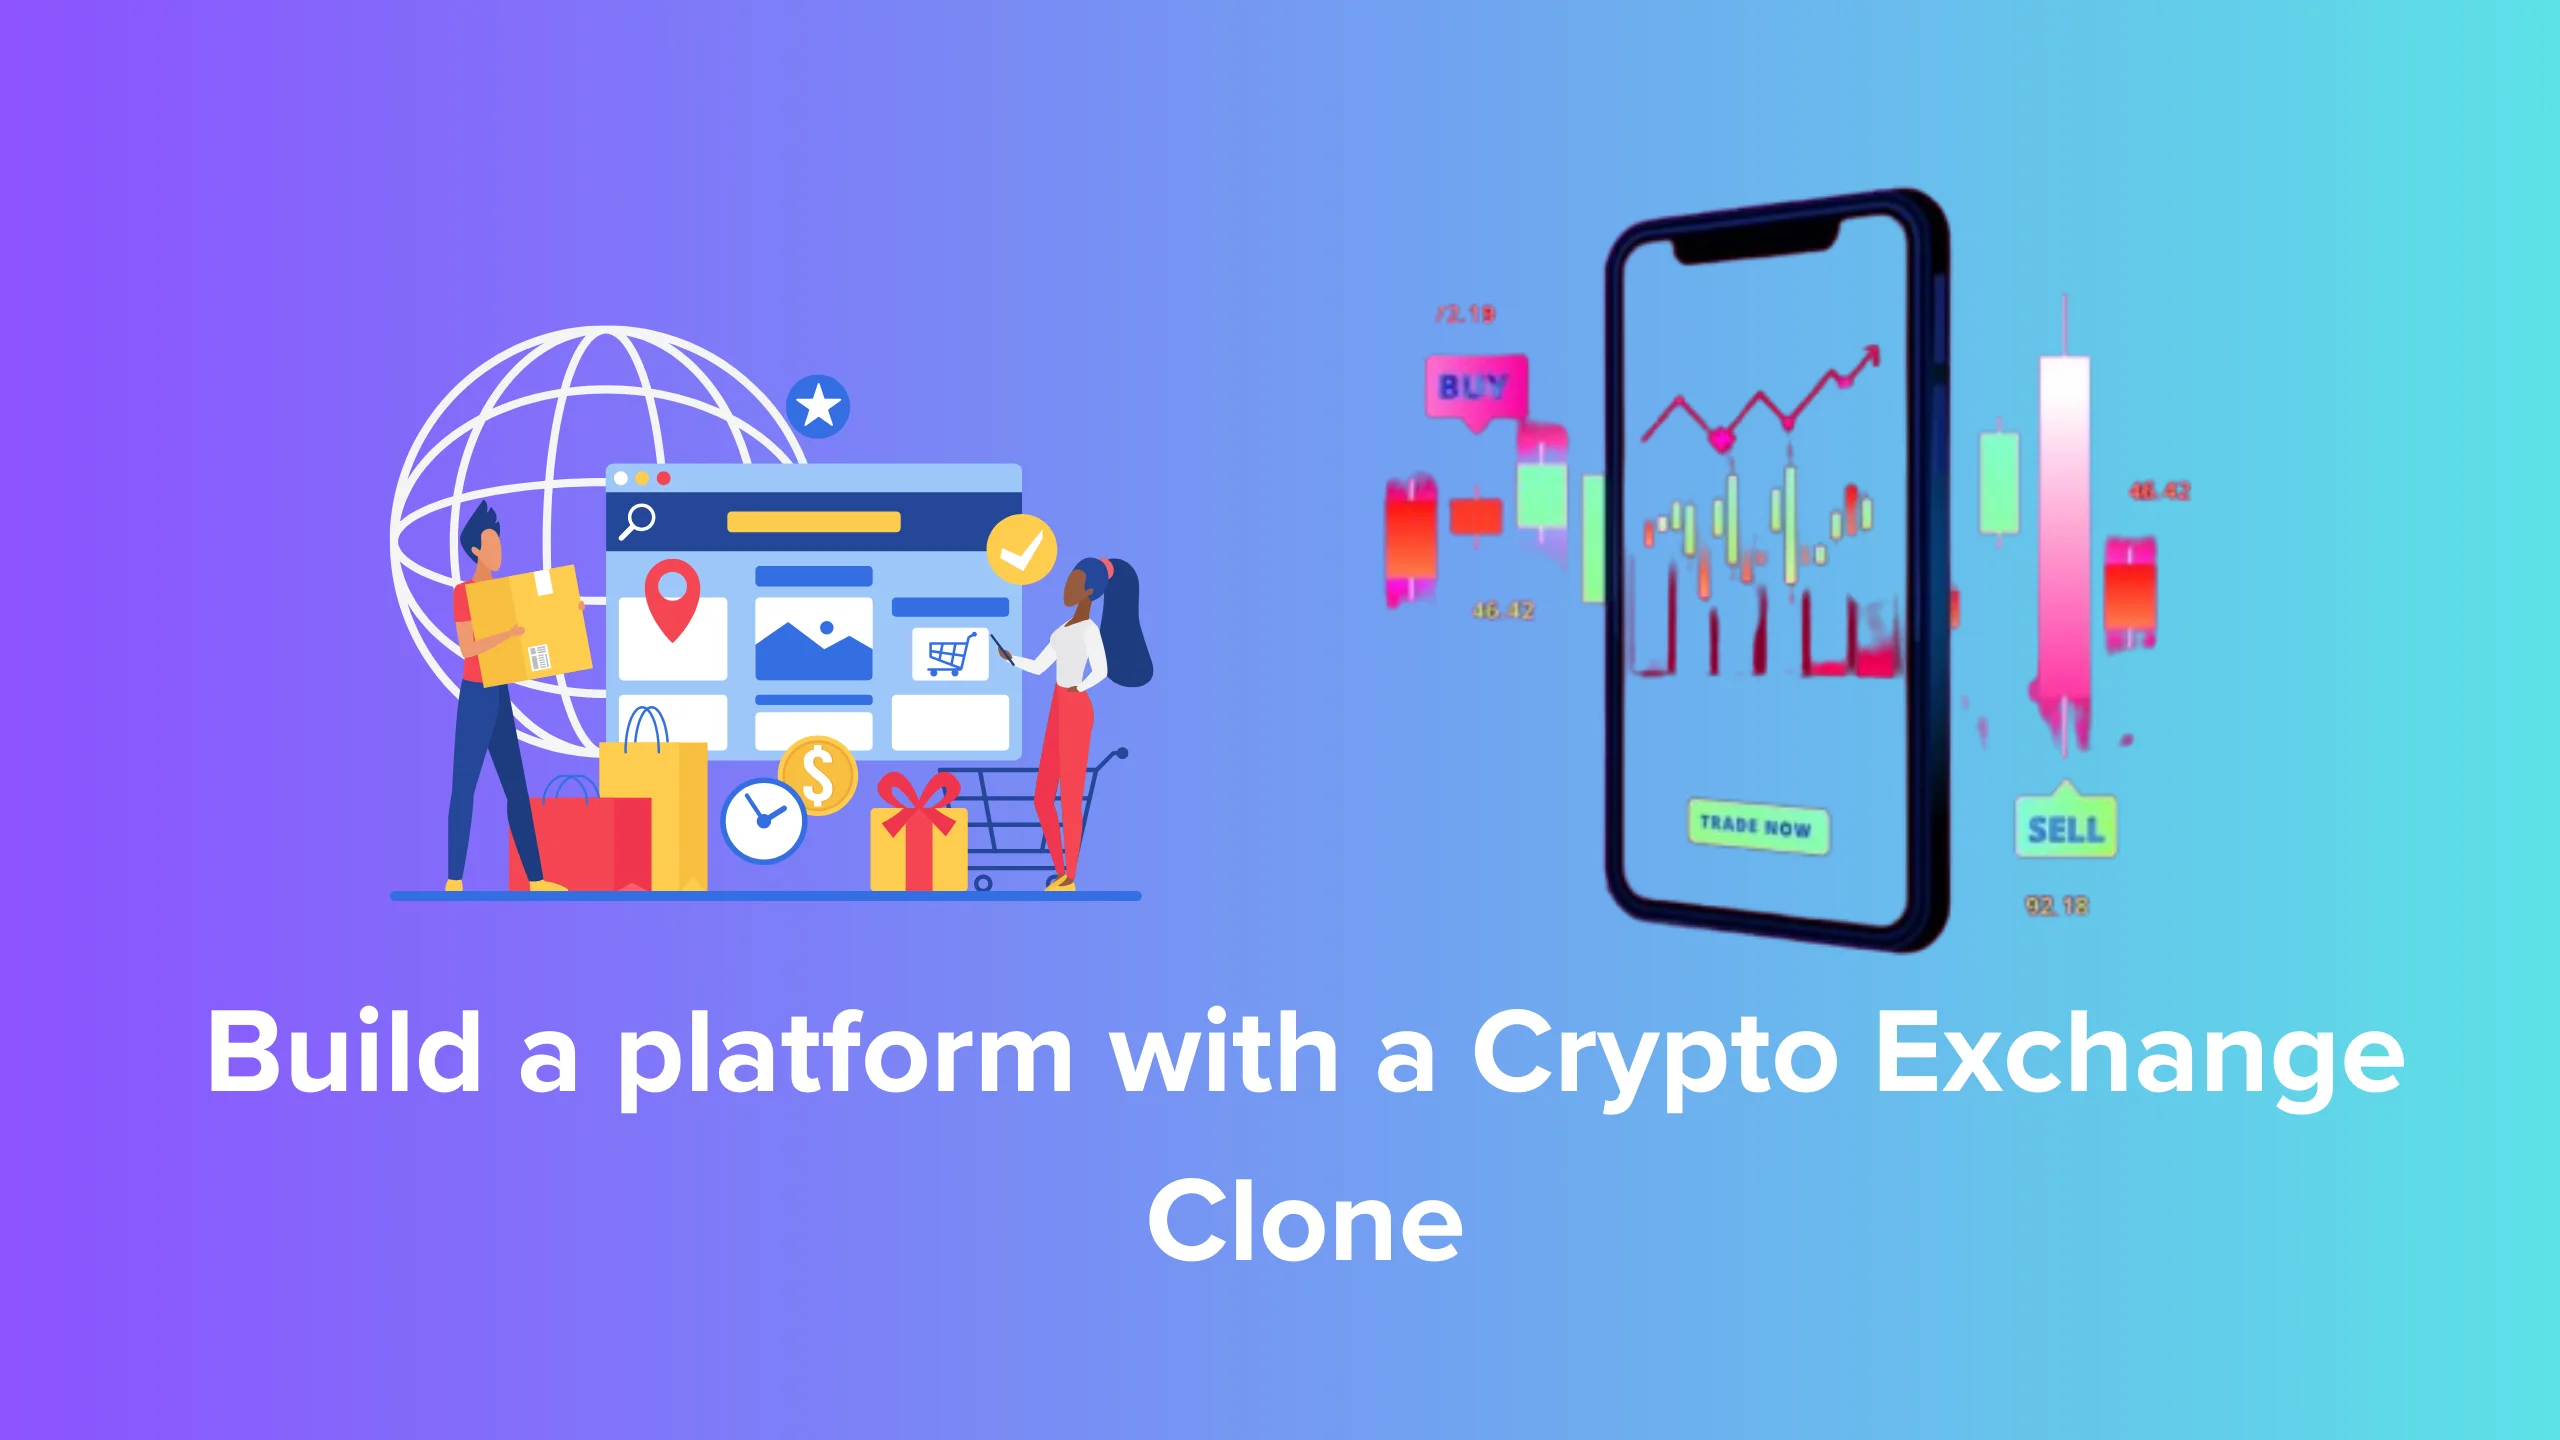 Let's look at how to build a platform with a Crypto Exchange Clone 